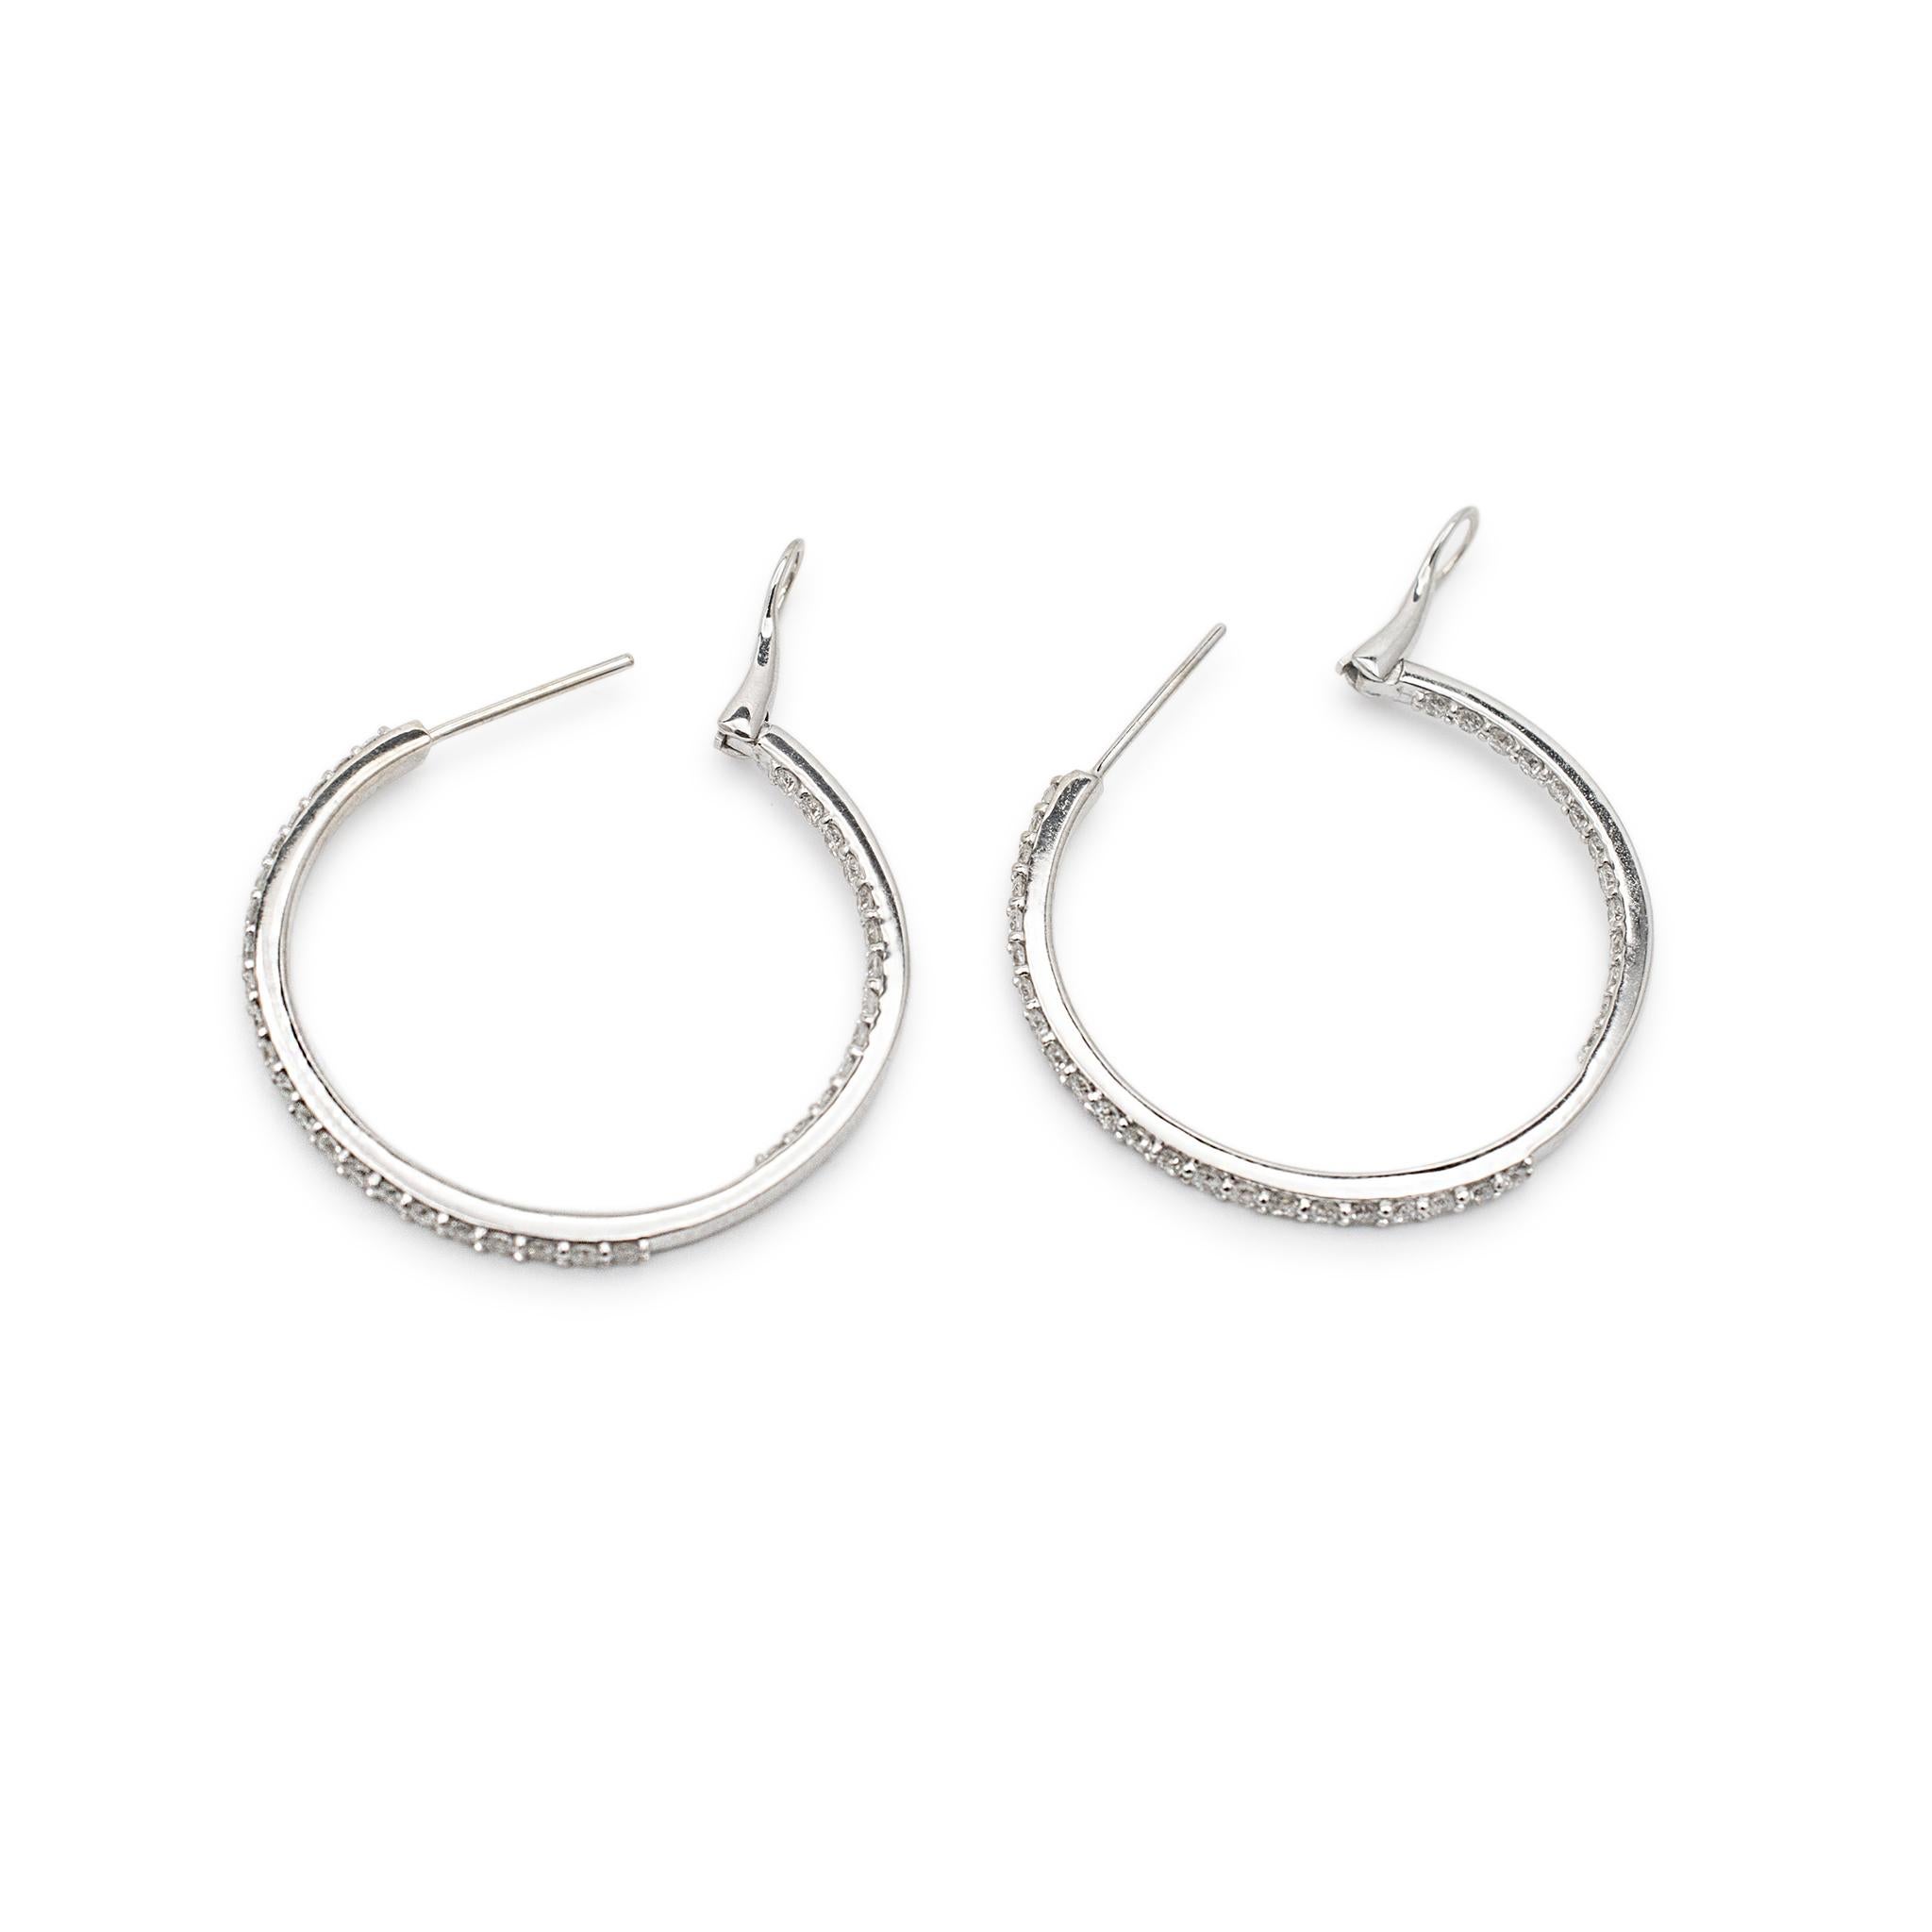 Taille ronde Ladies 14K White Gold 1.75ct Inside Out Diamond Hoops Earrings